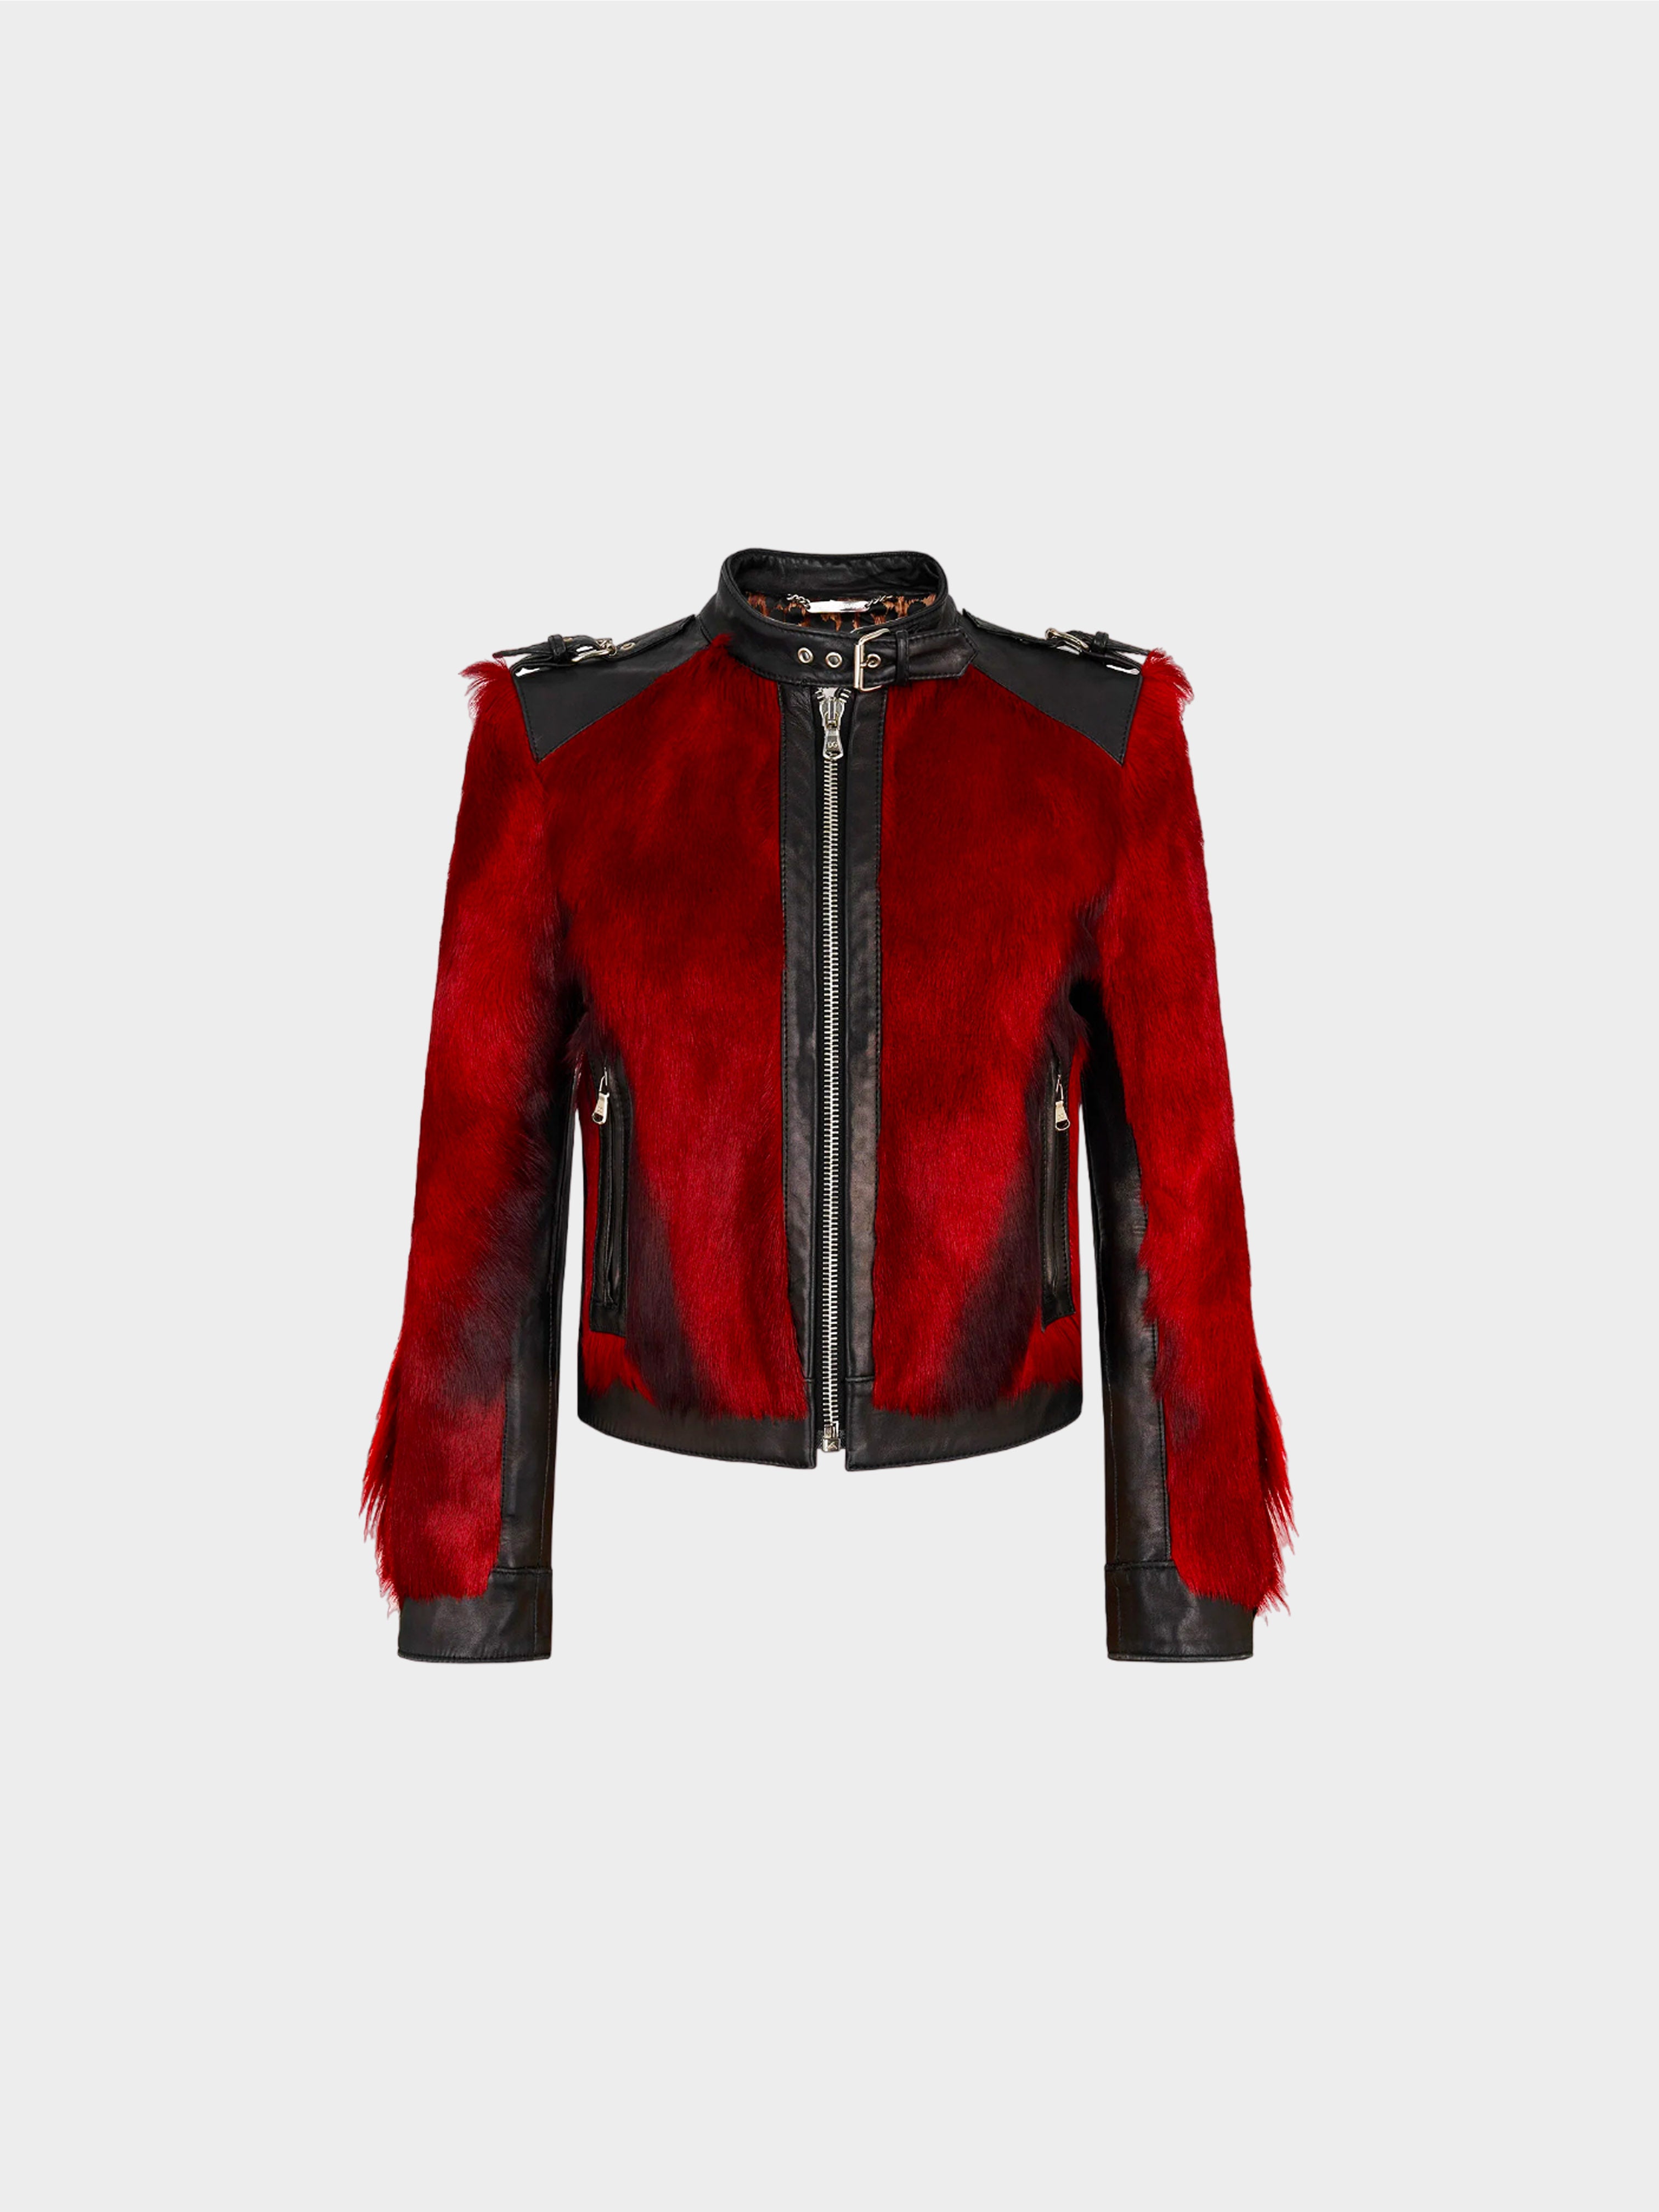 Dolce and Gabbana Fall 2001 Menswear Red Fur Leather Jacket